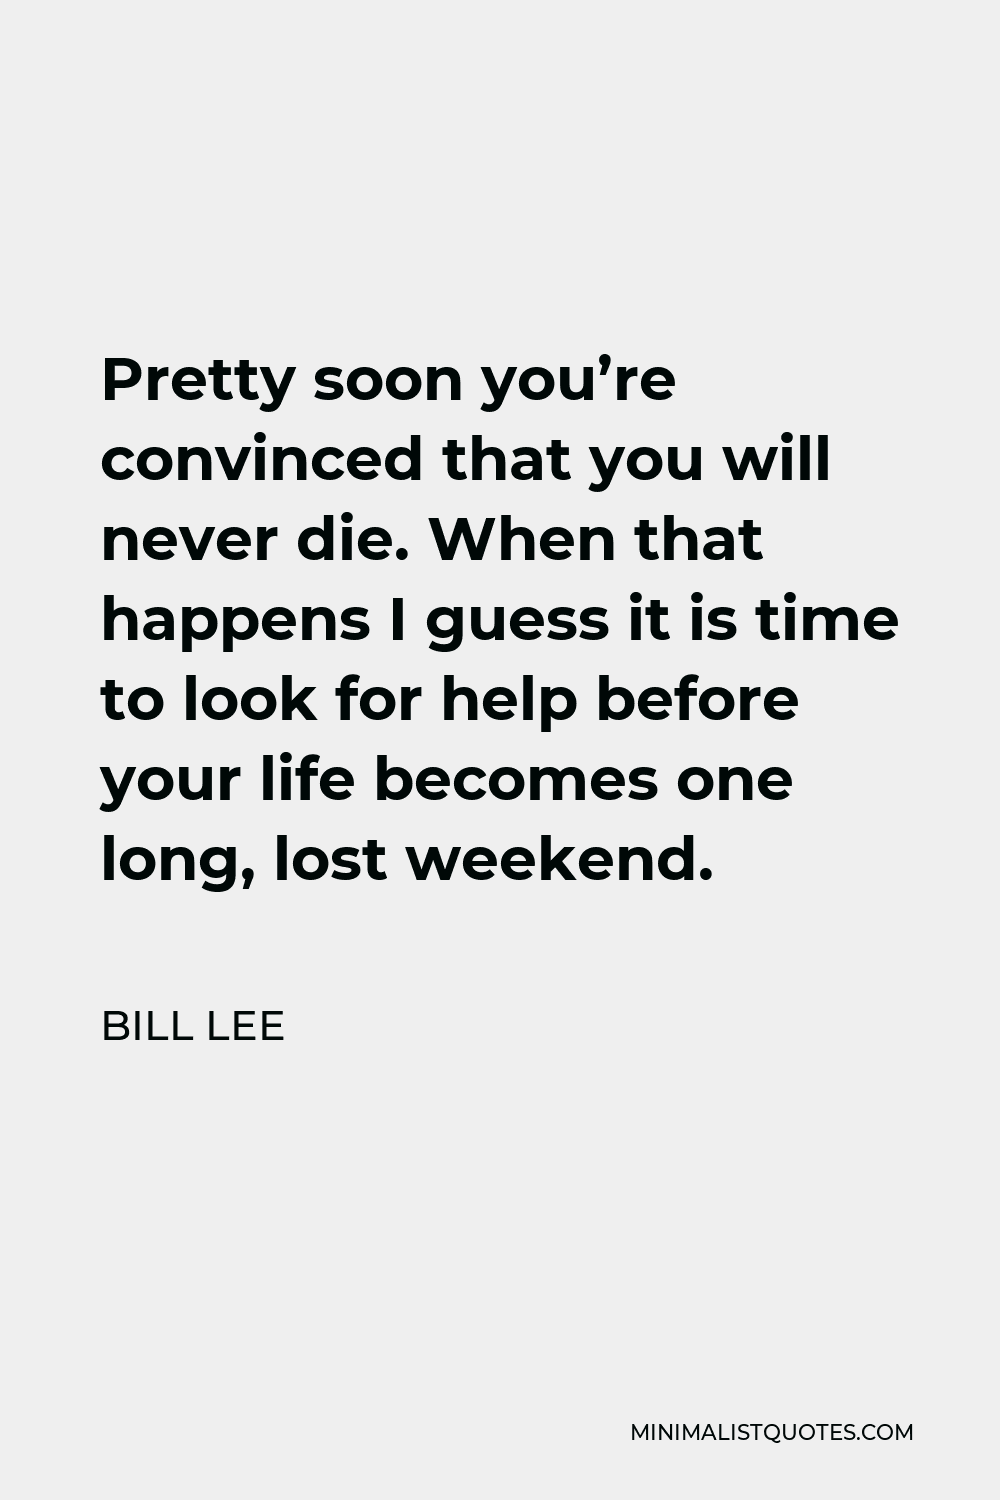 Bill Lee Quote - Pretty soon you’re convinced that you will never die. When that happens I guess it is time to look for help before your life becomes one long, lost weekend.